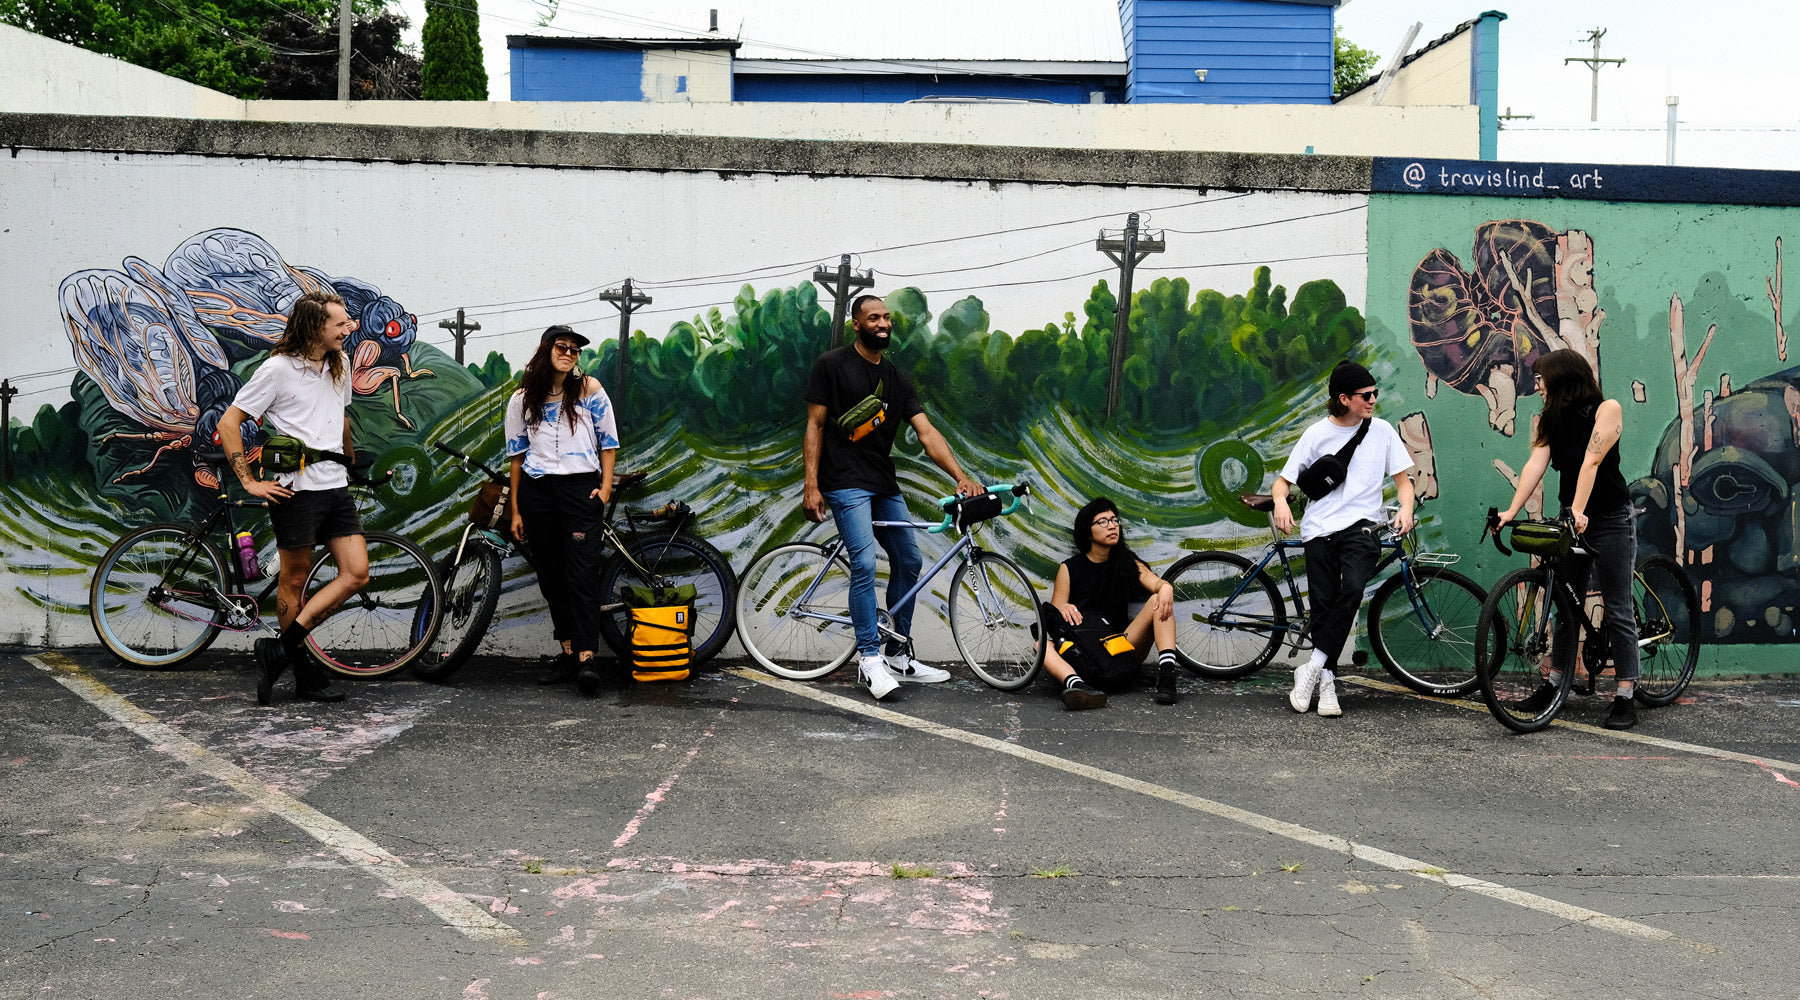 Wonder Goods crew hanging out on bikes by a mural